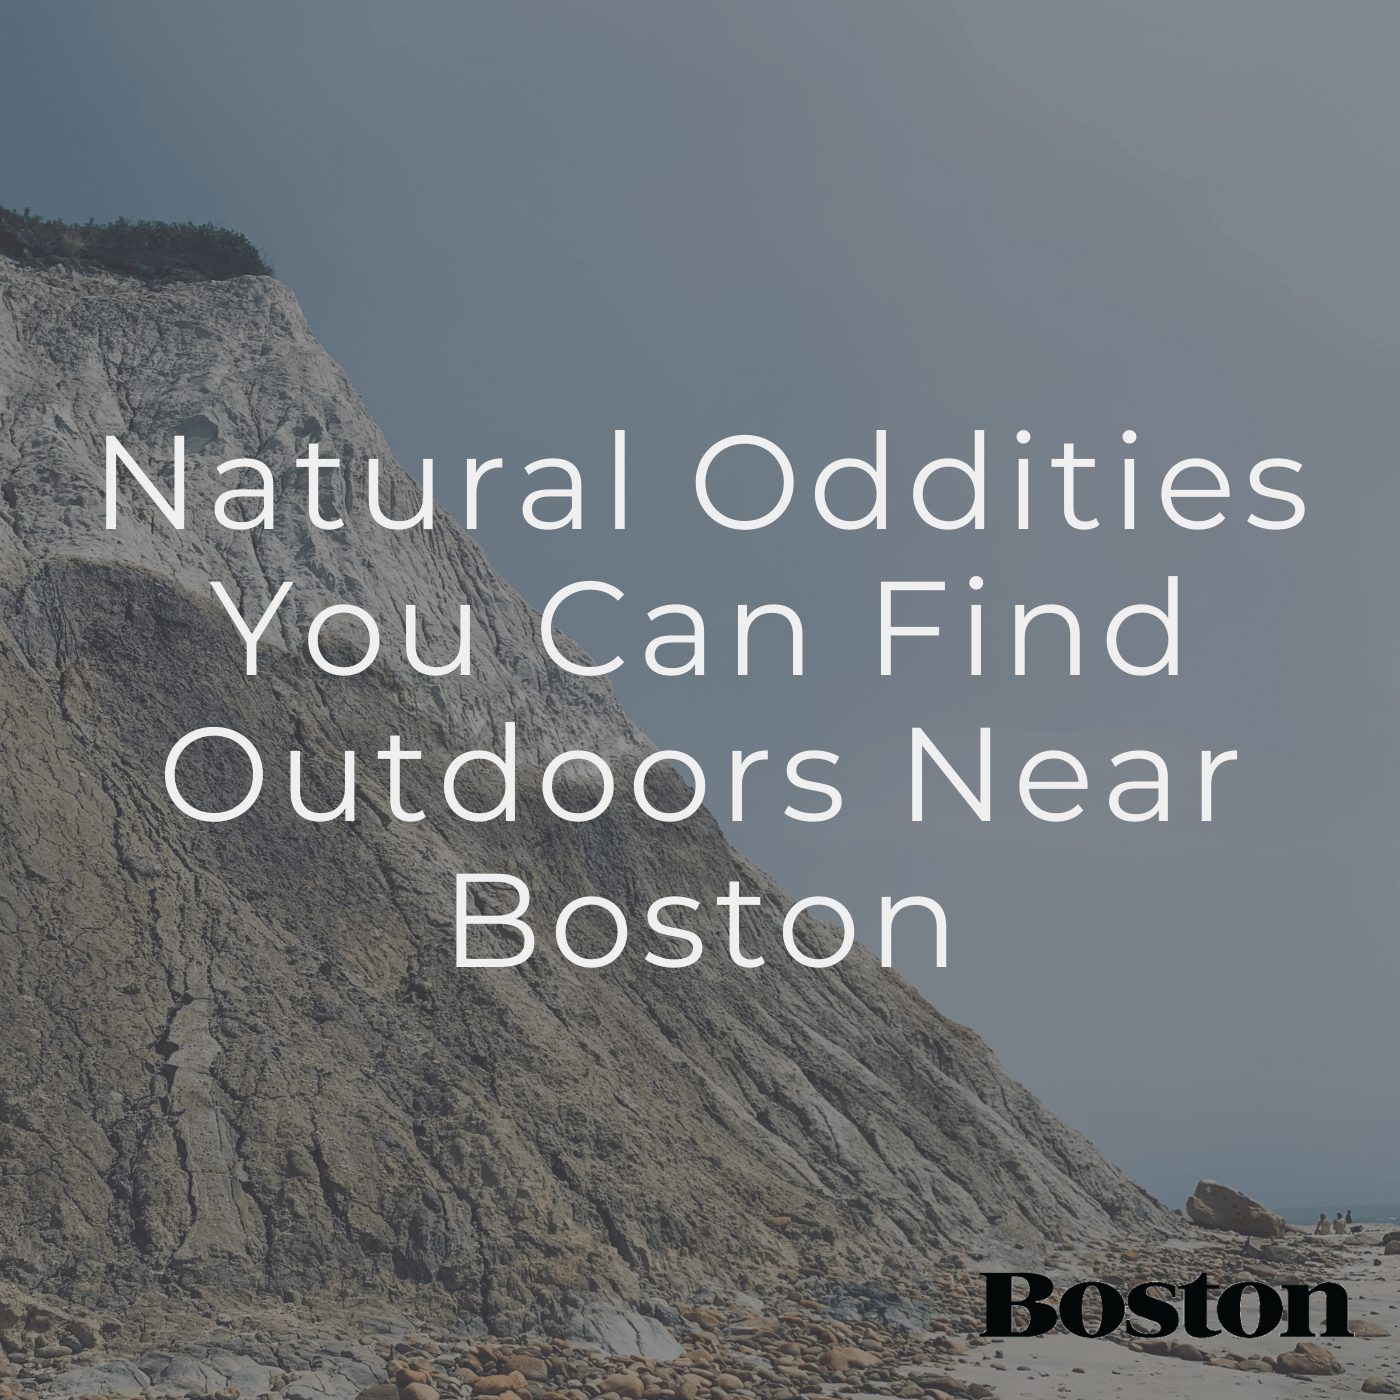 Natural Oddities You Can Find Outdoors near Boston